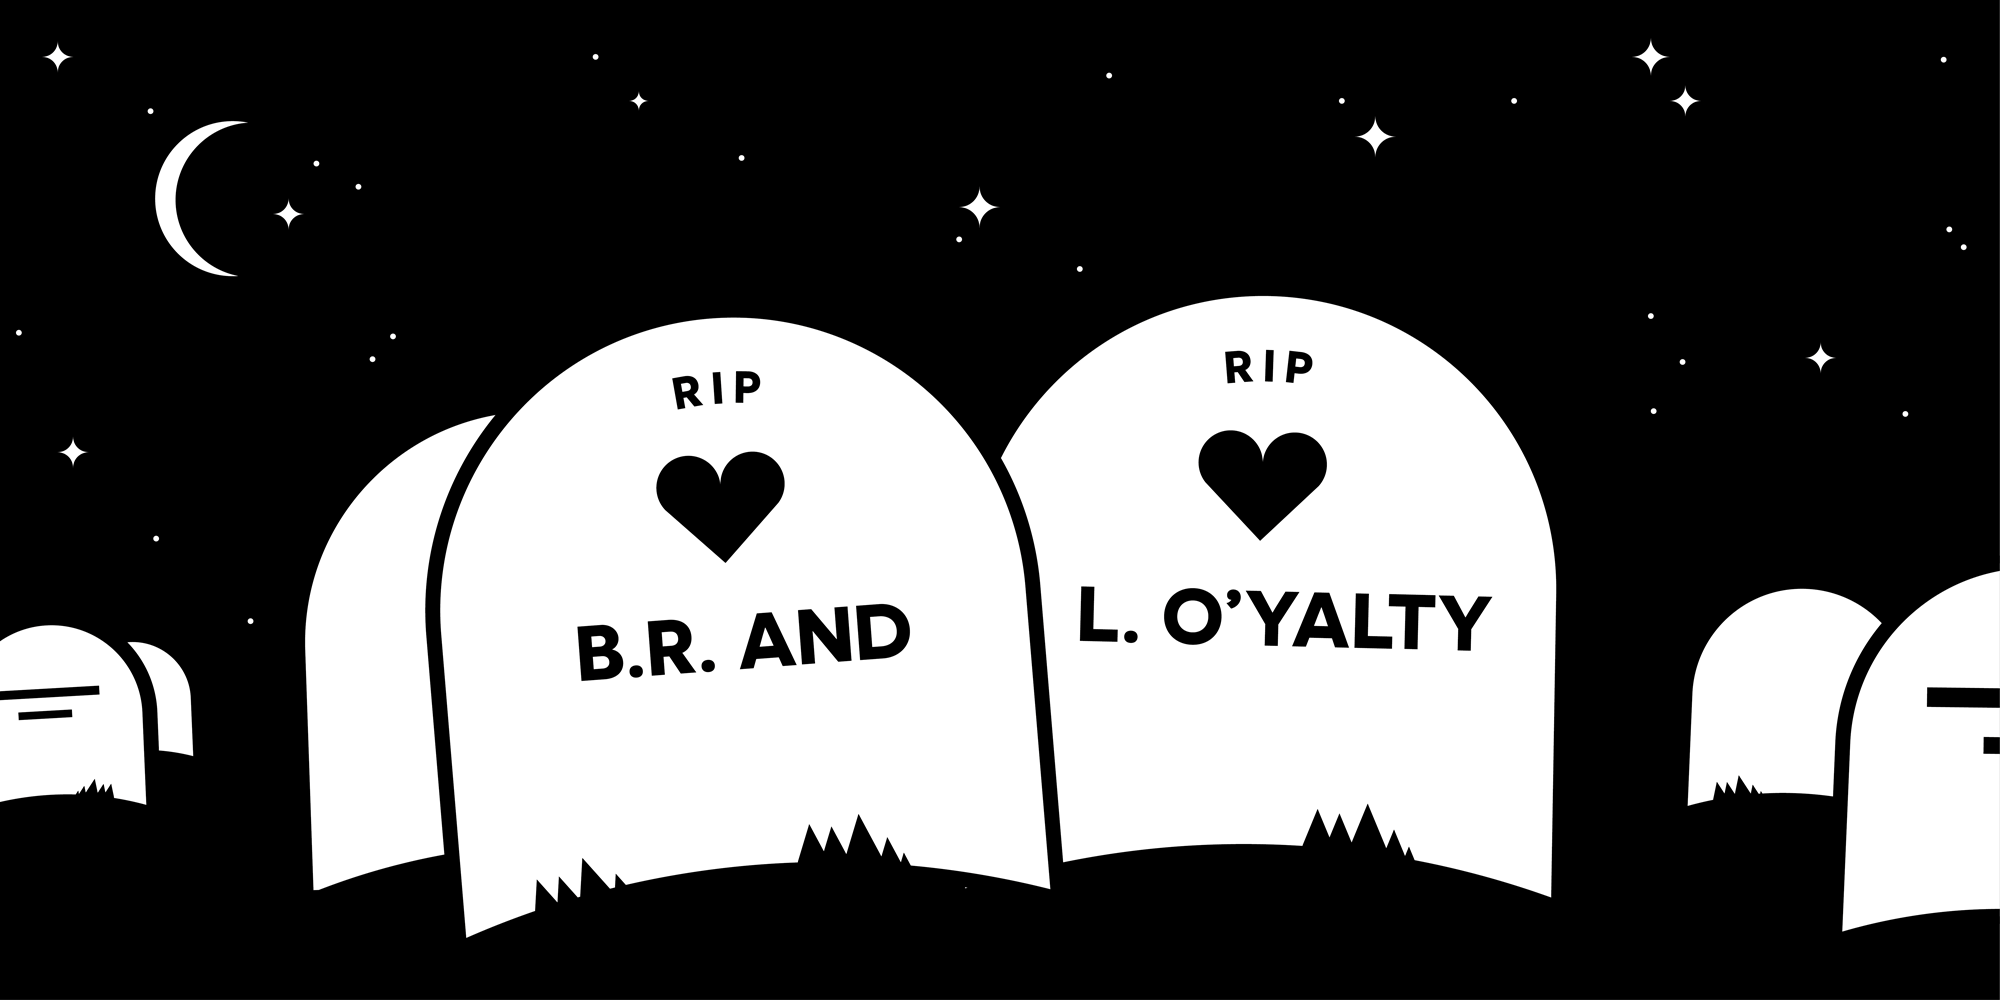 The death of brand loyalty